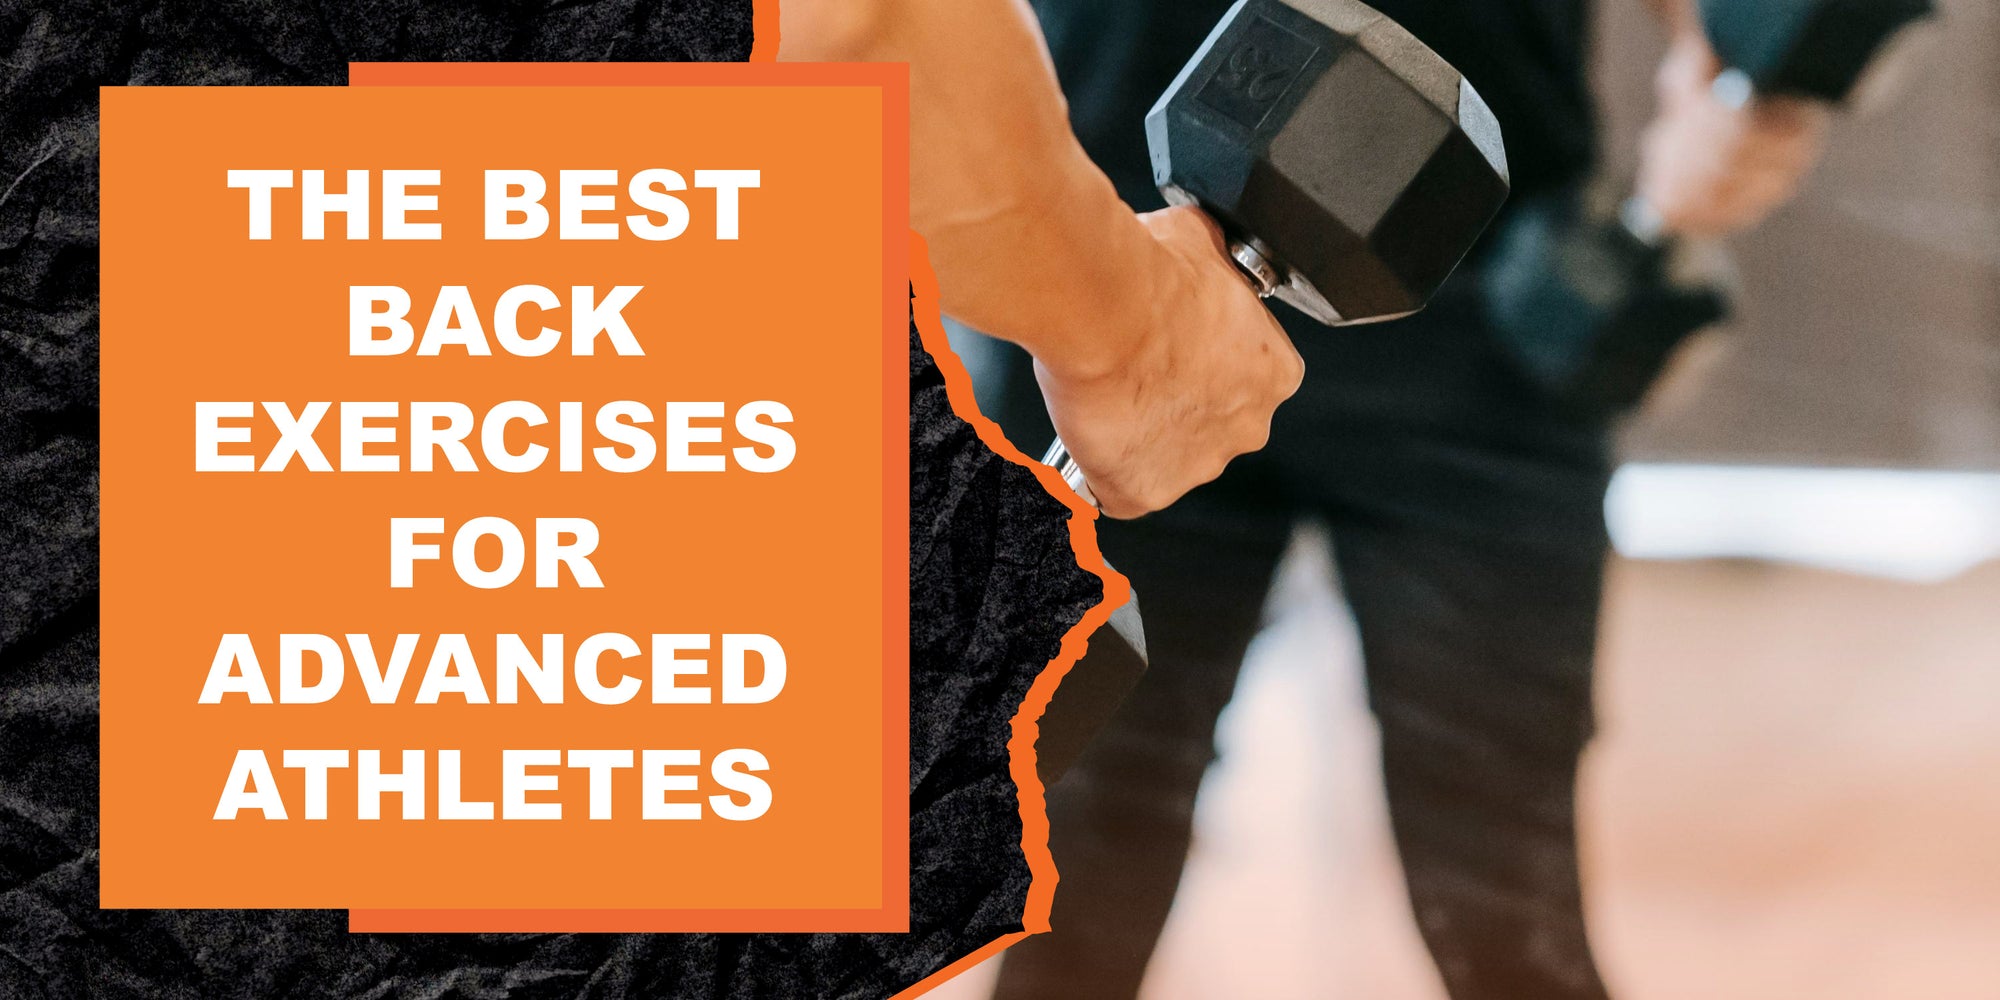 the-best-back-exercises-for-advanced-athletes-magma-fitness